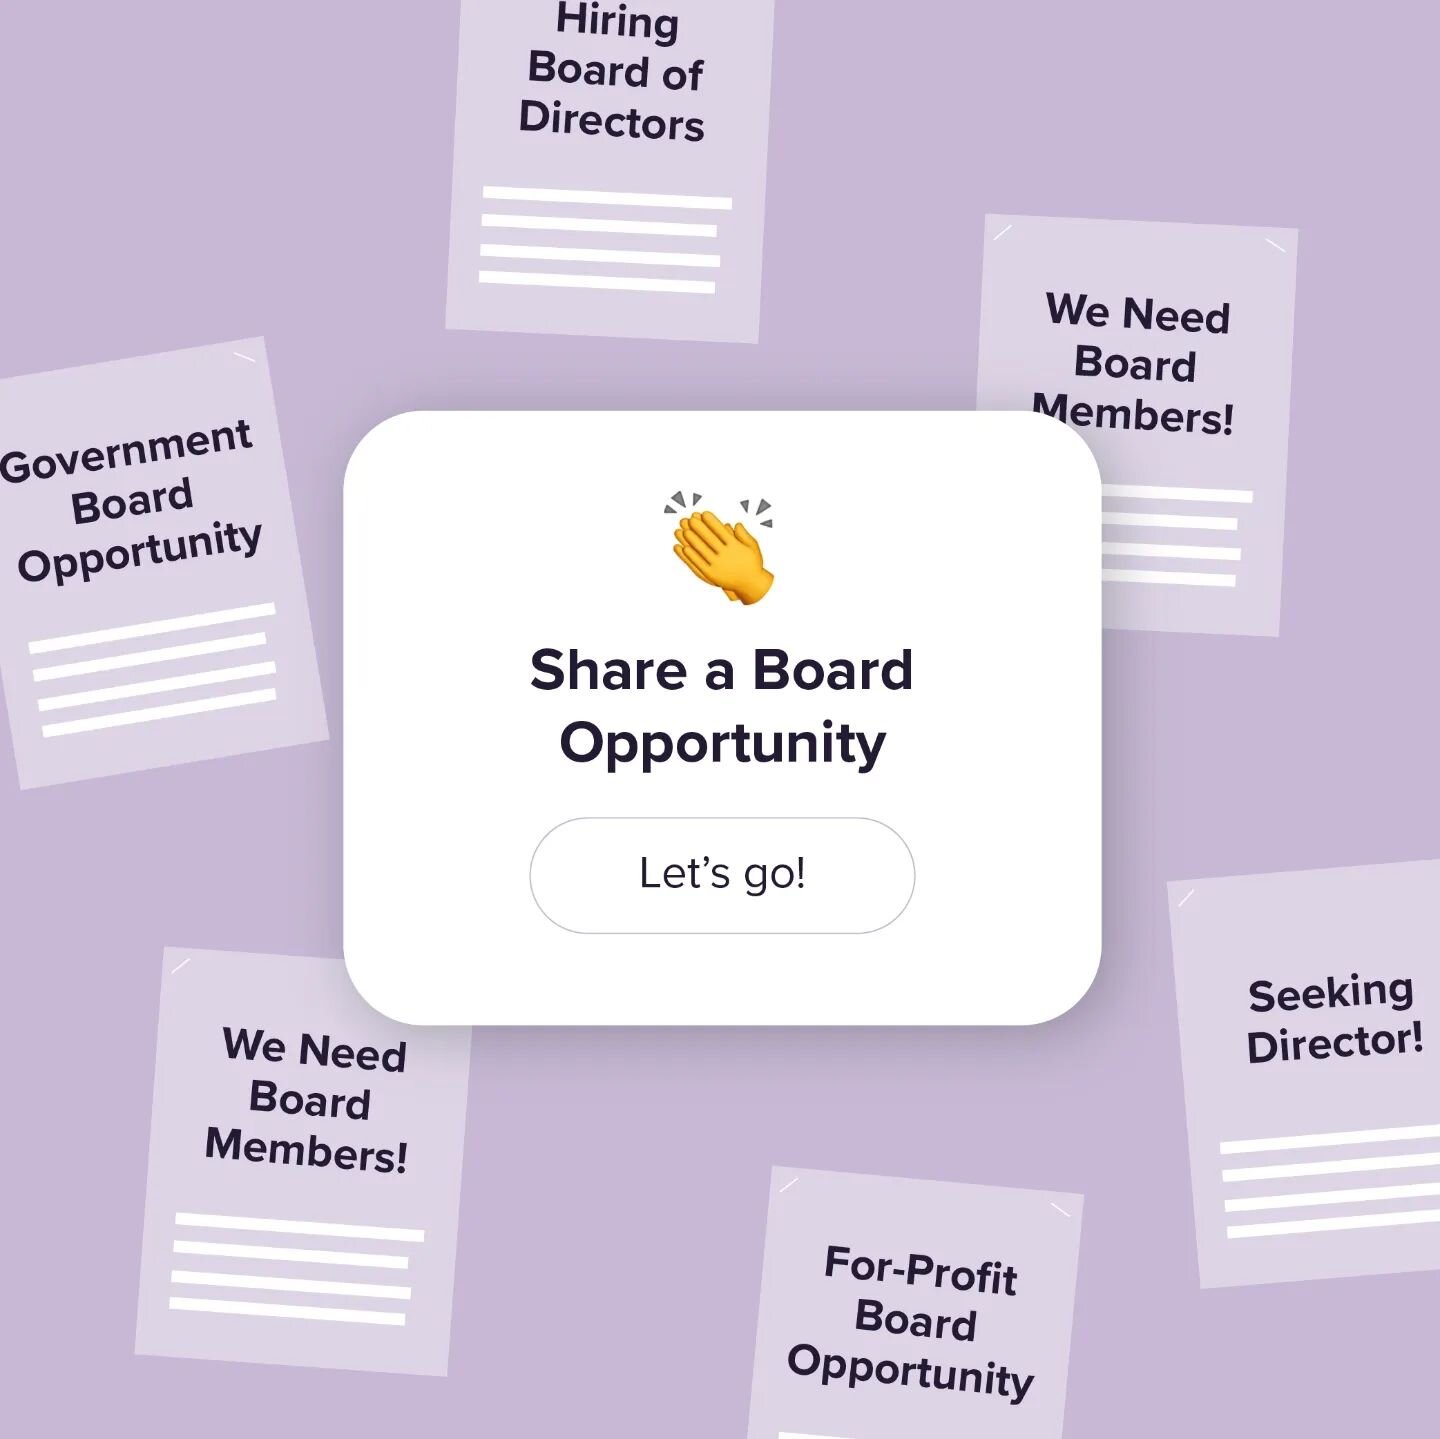 Looking for a perfect match?! 💝
⁠
We've got you! Our new platform is where you can find current Board Opportunities so you can start getting board experience and enacting change in your community.

THIS IS FREE TO ACCESS, all you have to do is make 